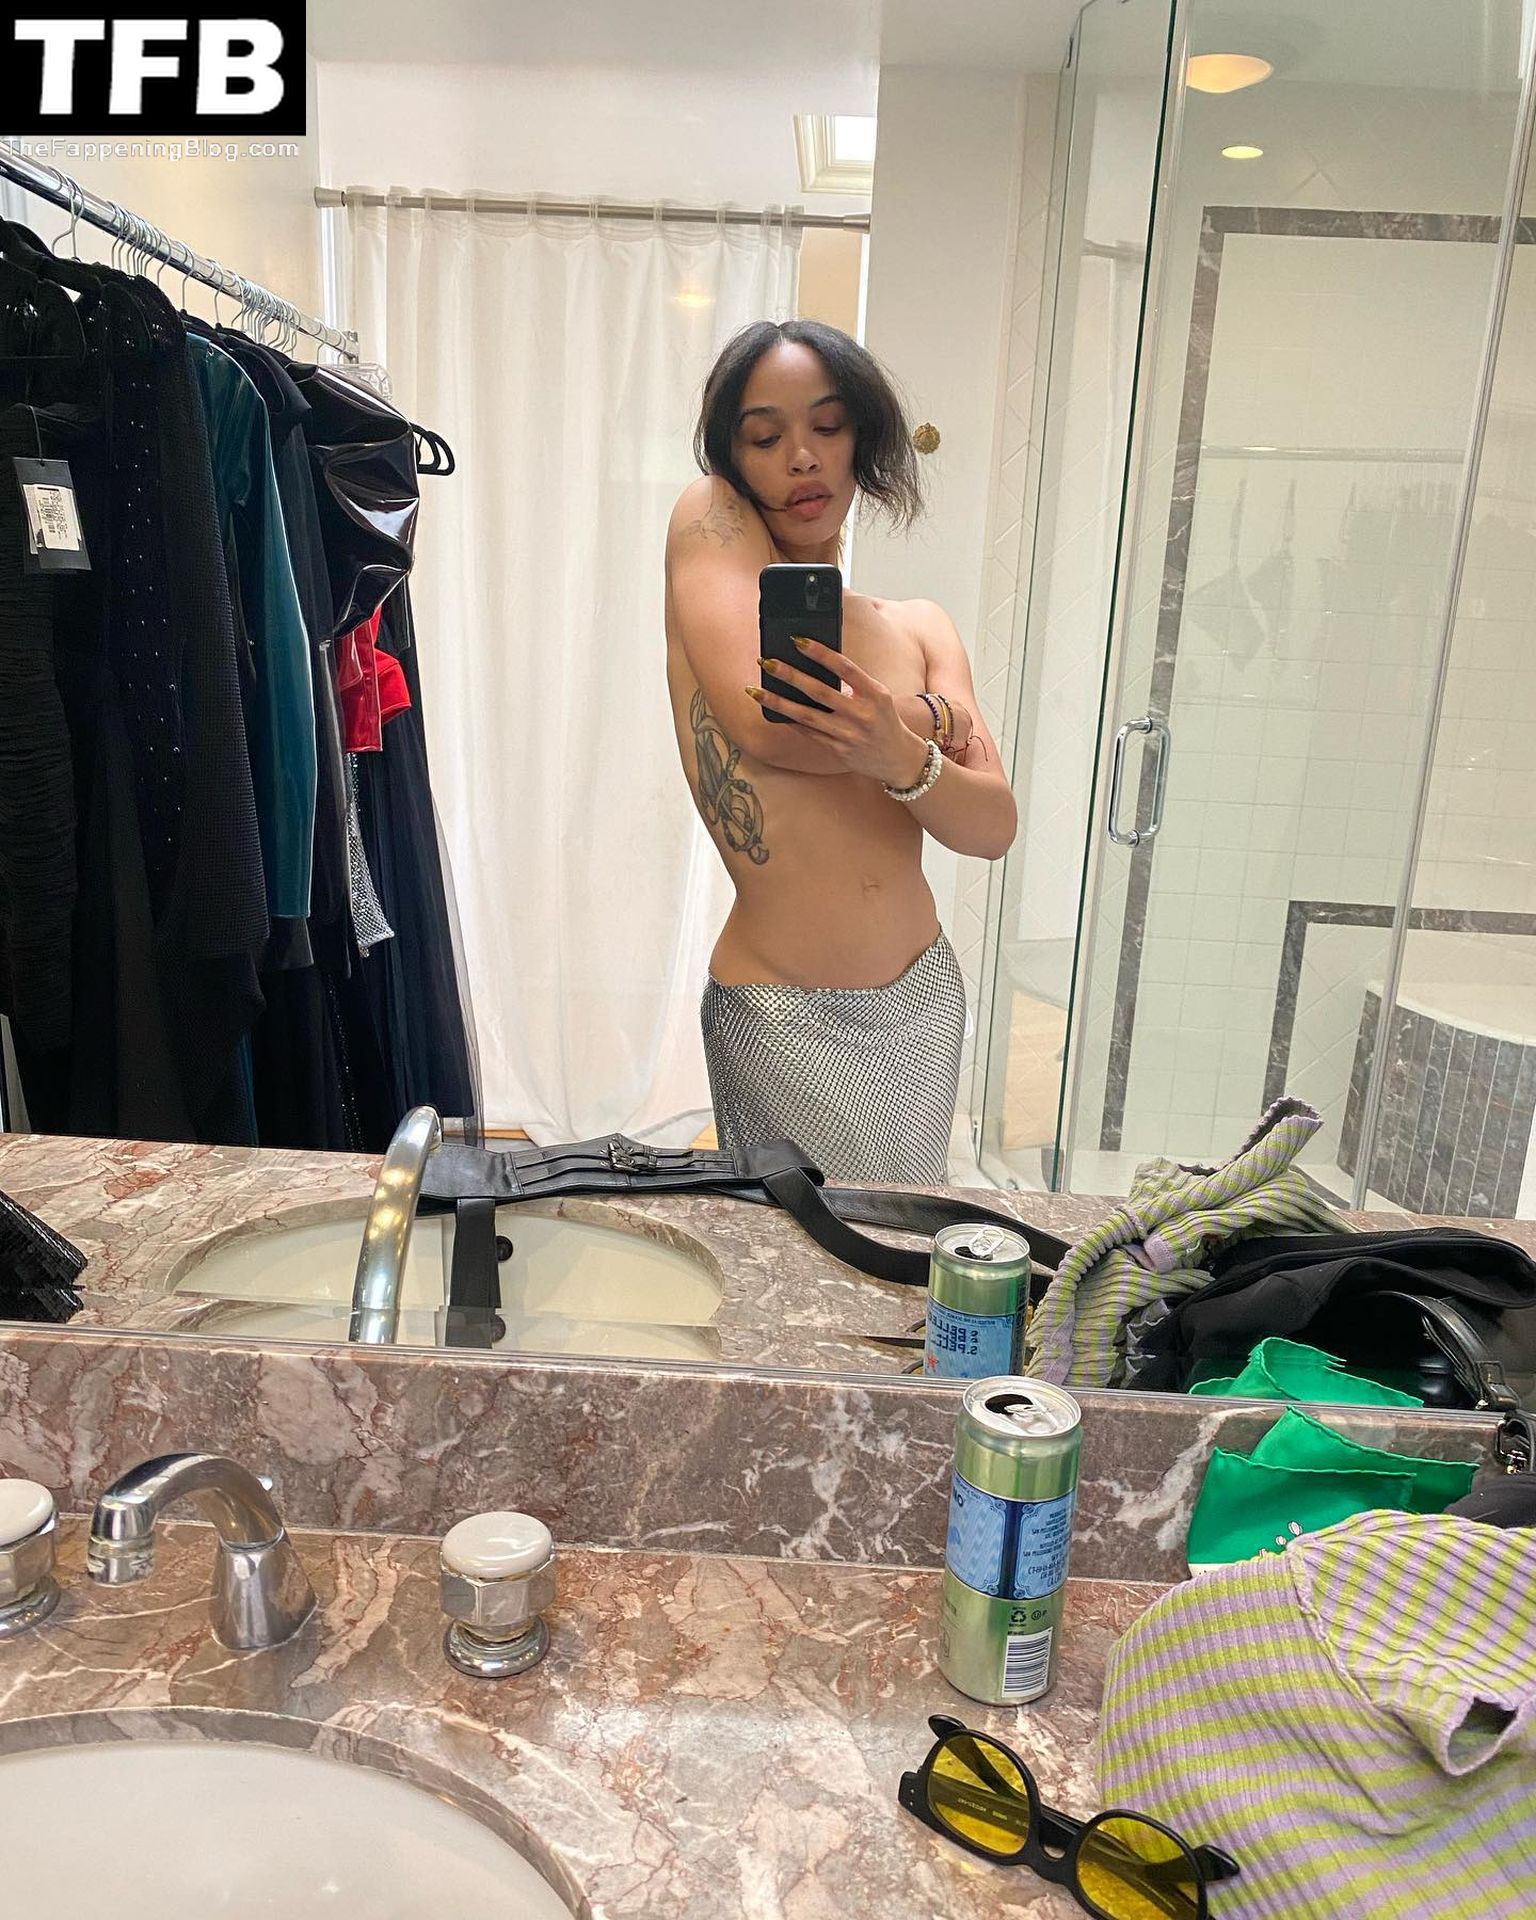 Cleopatra-Coleman-Topless-The-Fappening-Blog-2.jpg